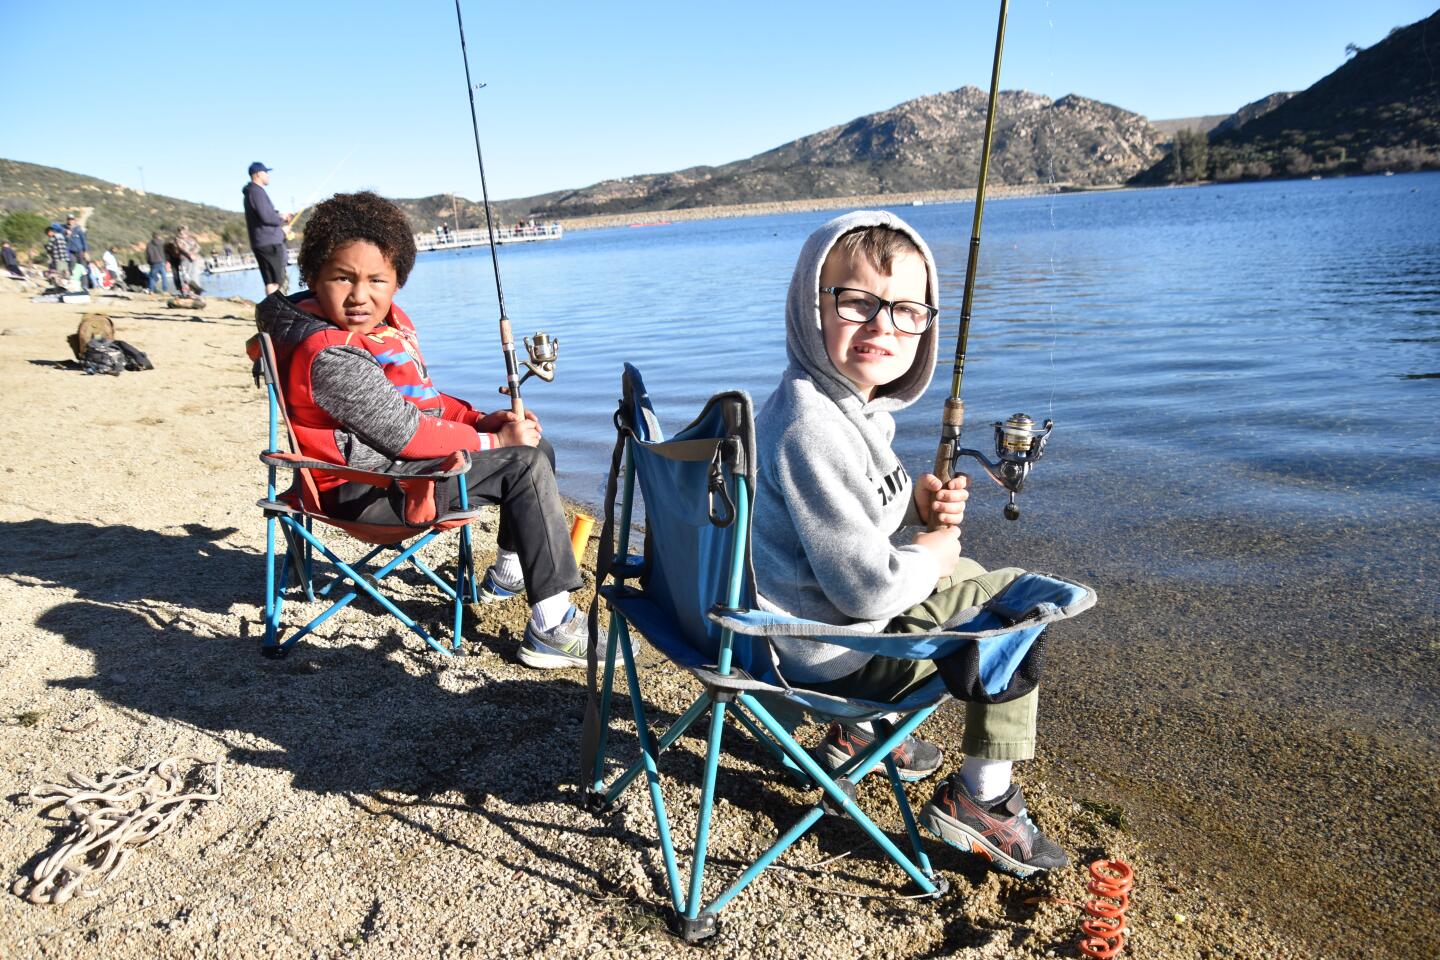 About 400 kids enjoy a day at Lake Poway for fishing derby